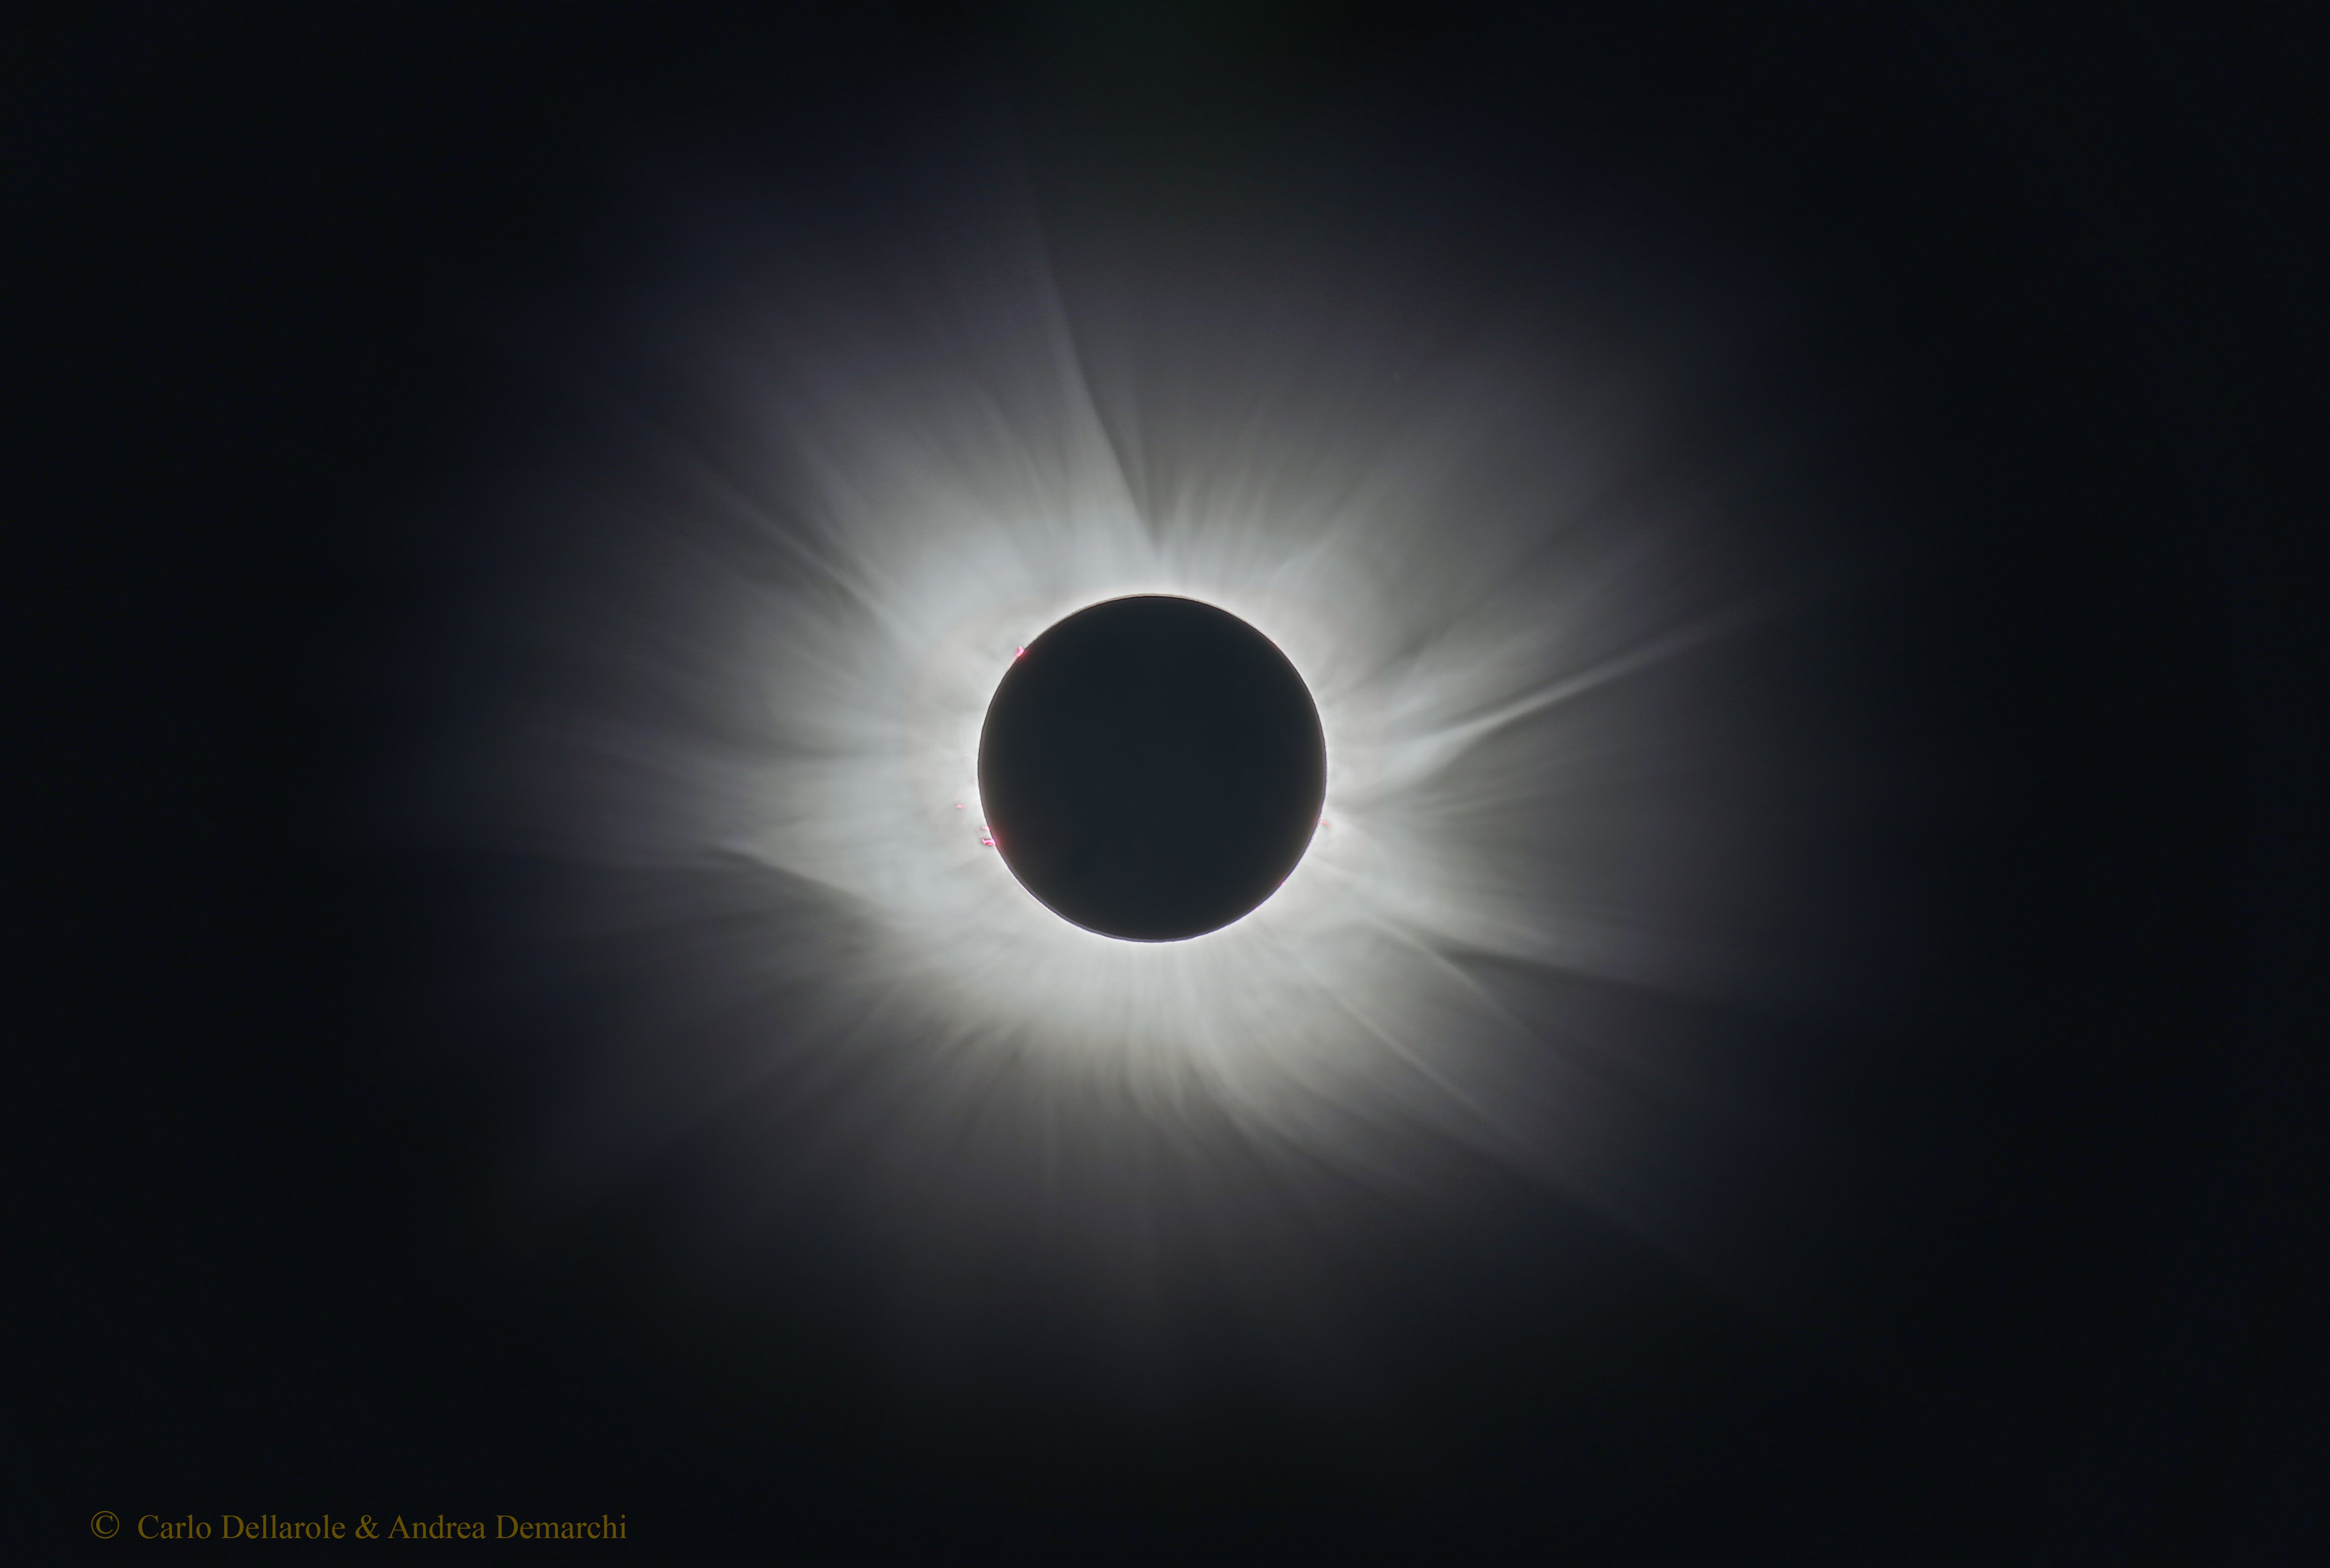 Total sun eclipse photographed from Fær Øer Islands: 622 KB; click on the image to enlarge